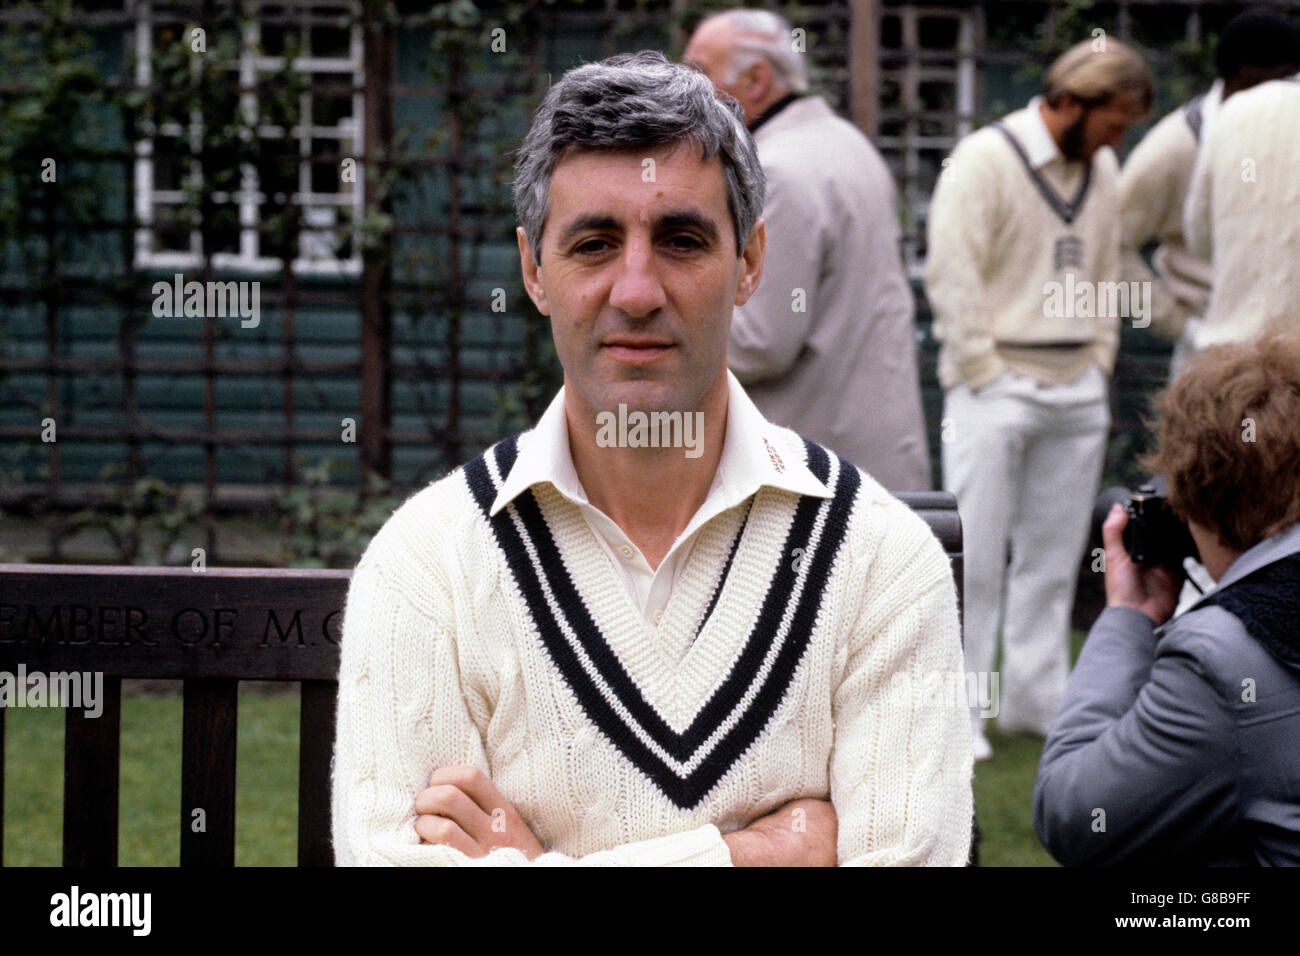 Cricket - Middlesex CCC Photocall - Lord's. Mike Brearley, Middlesex Stock Photo